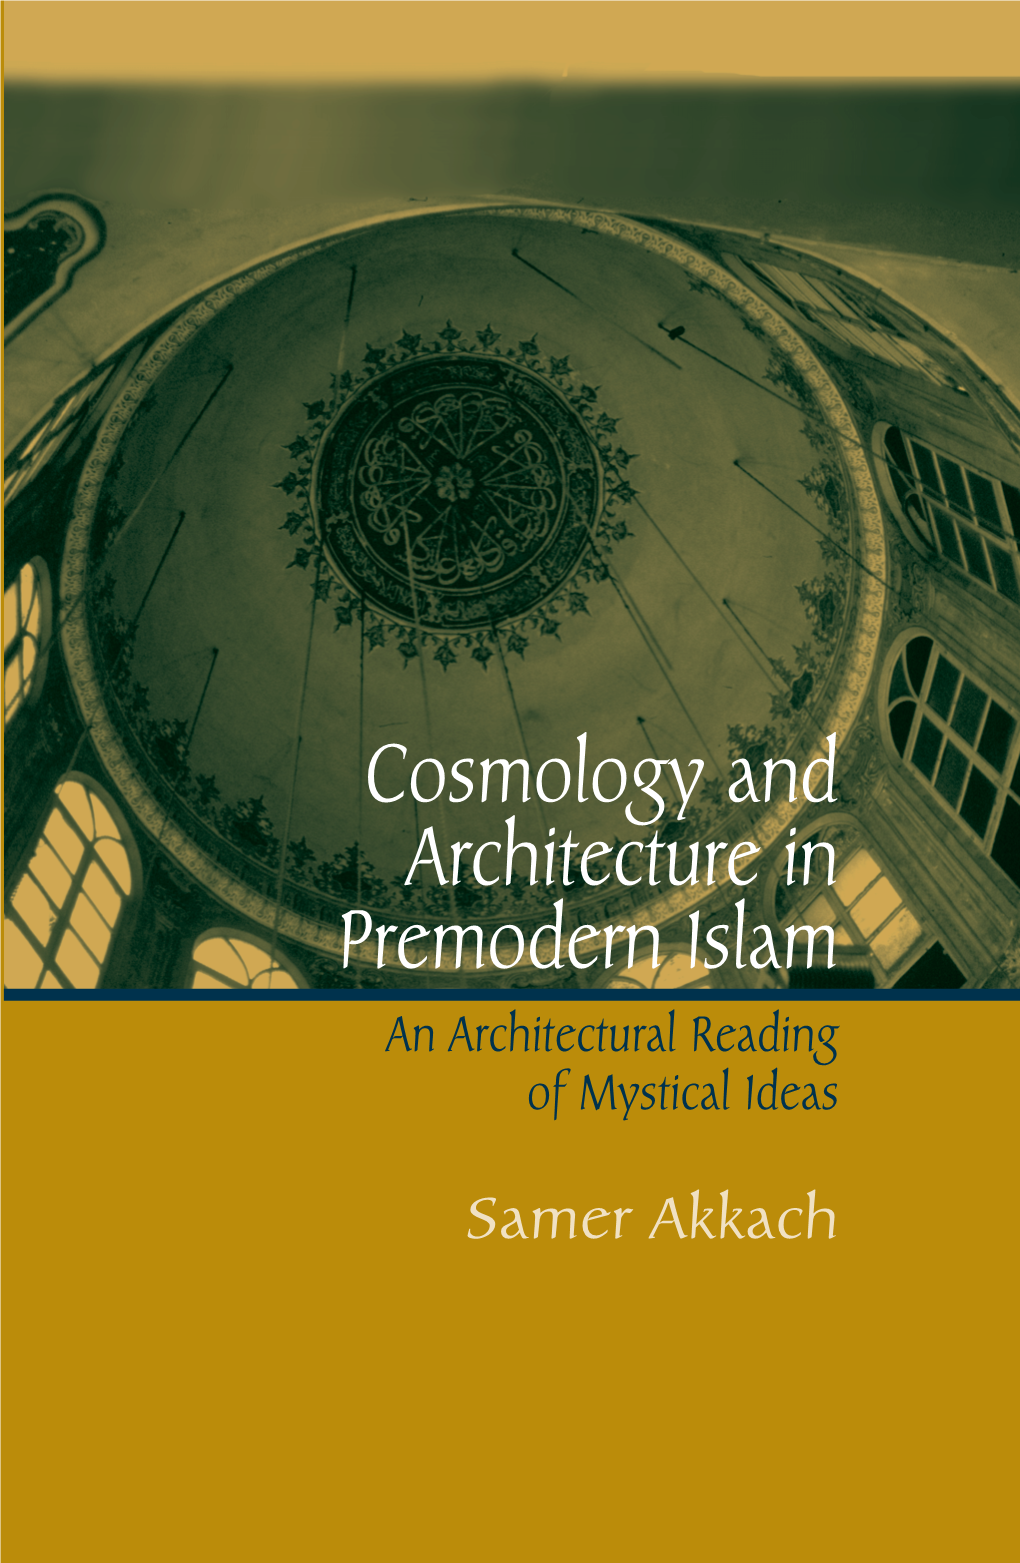 Cosmology and Architecture in Premodern Islam an Architectural Reading of Mystical Ideas